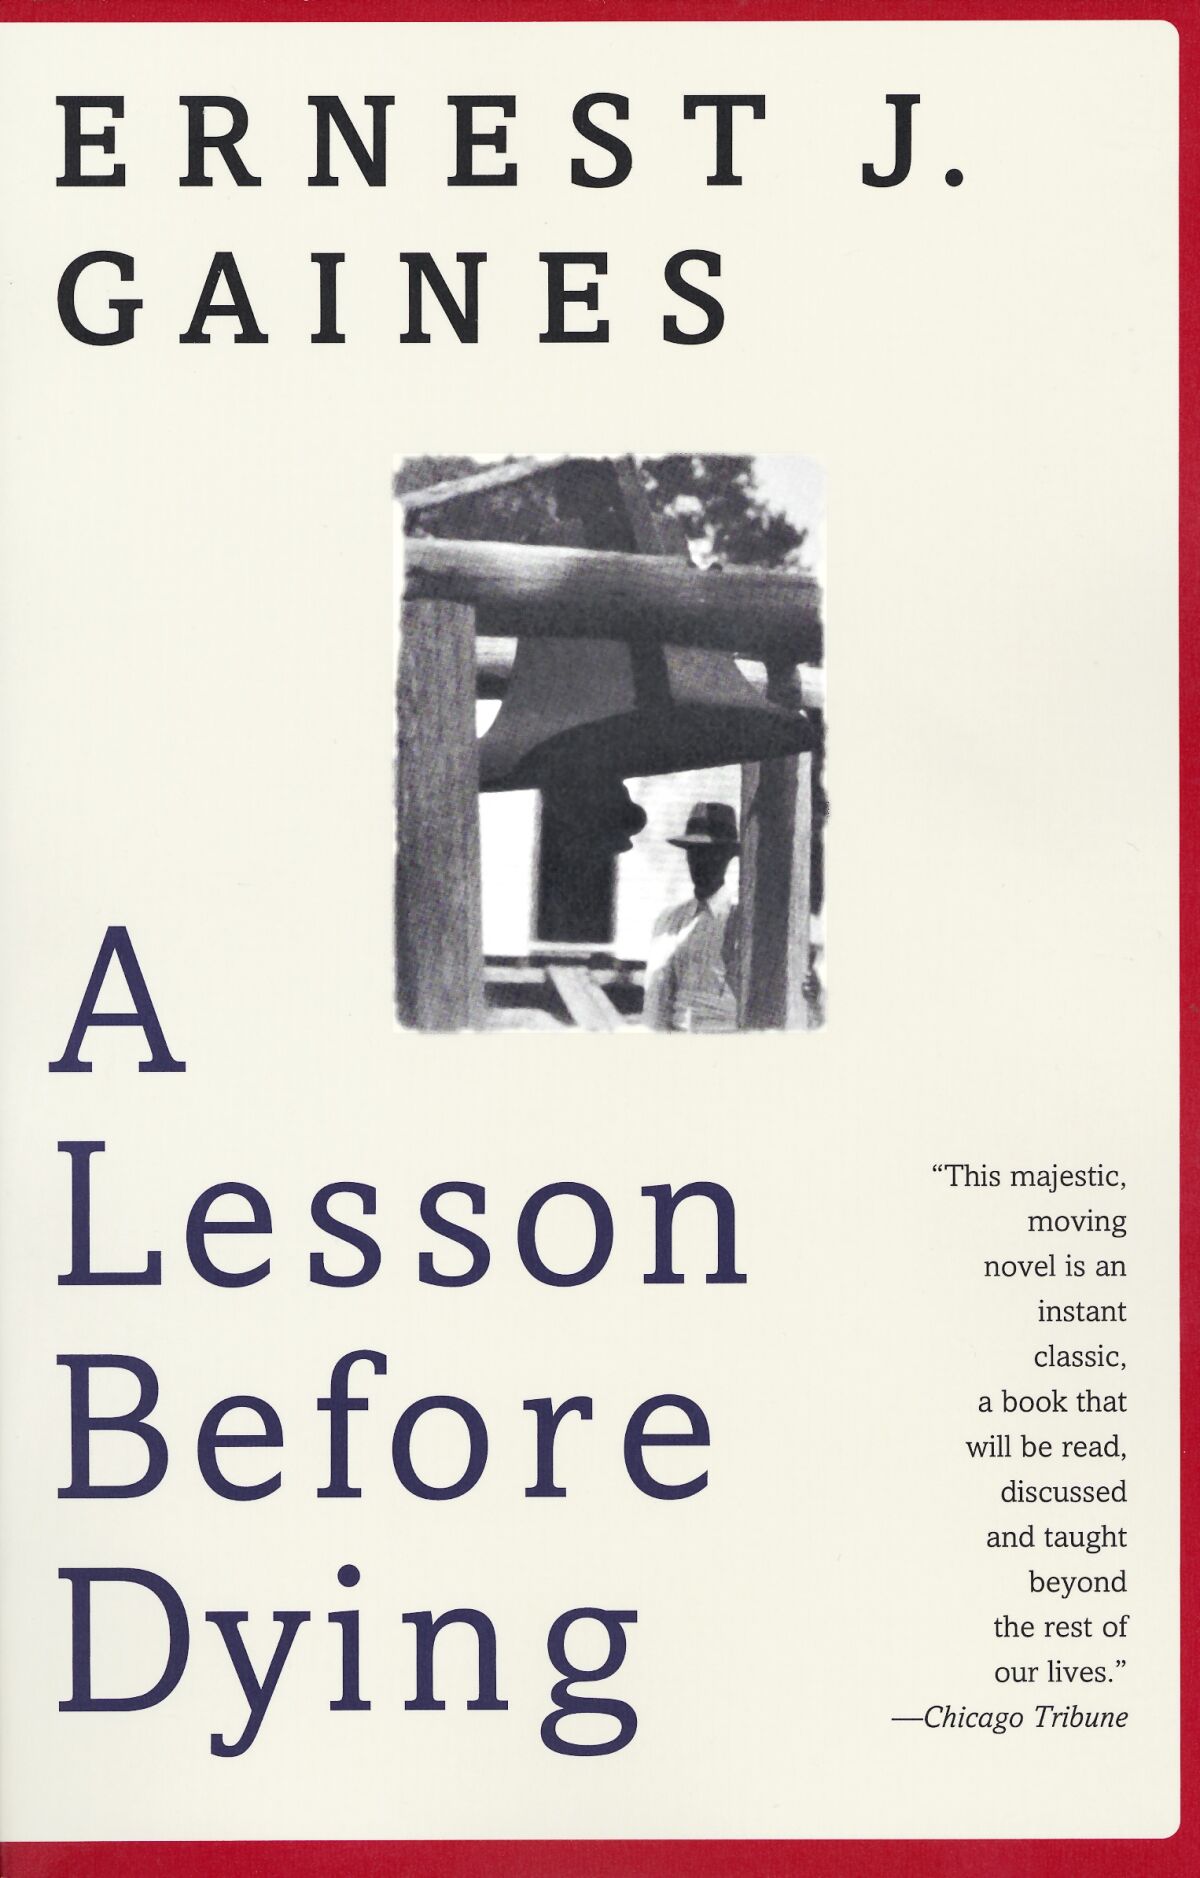 "A Lesson Before Dying" by Ernest J. Gaines